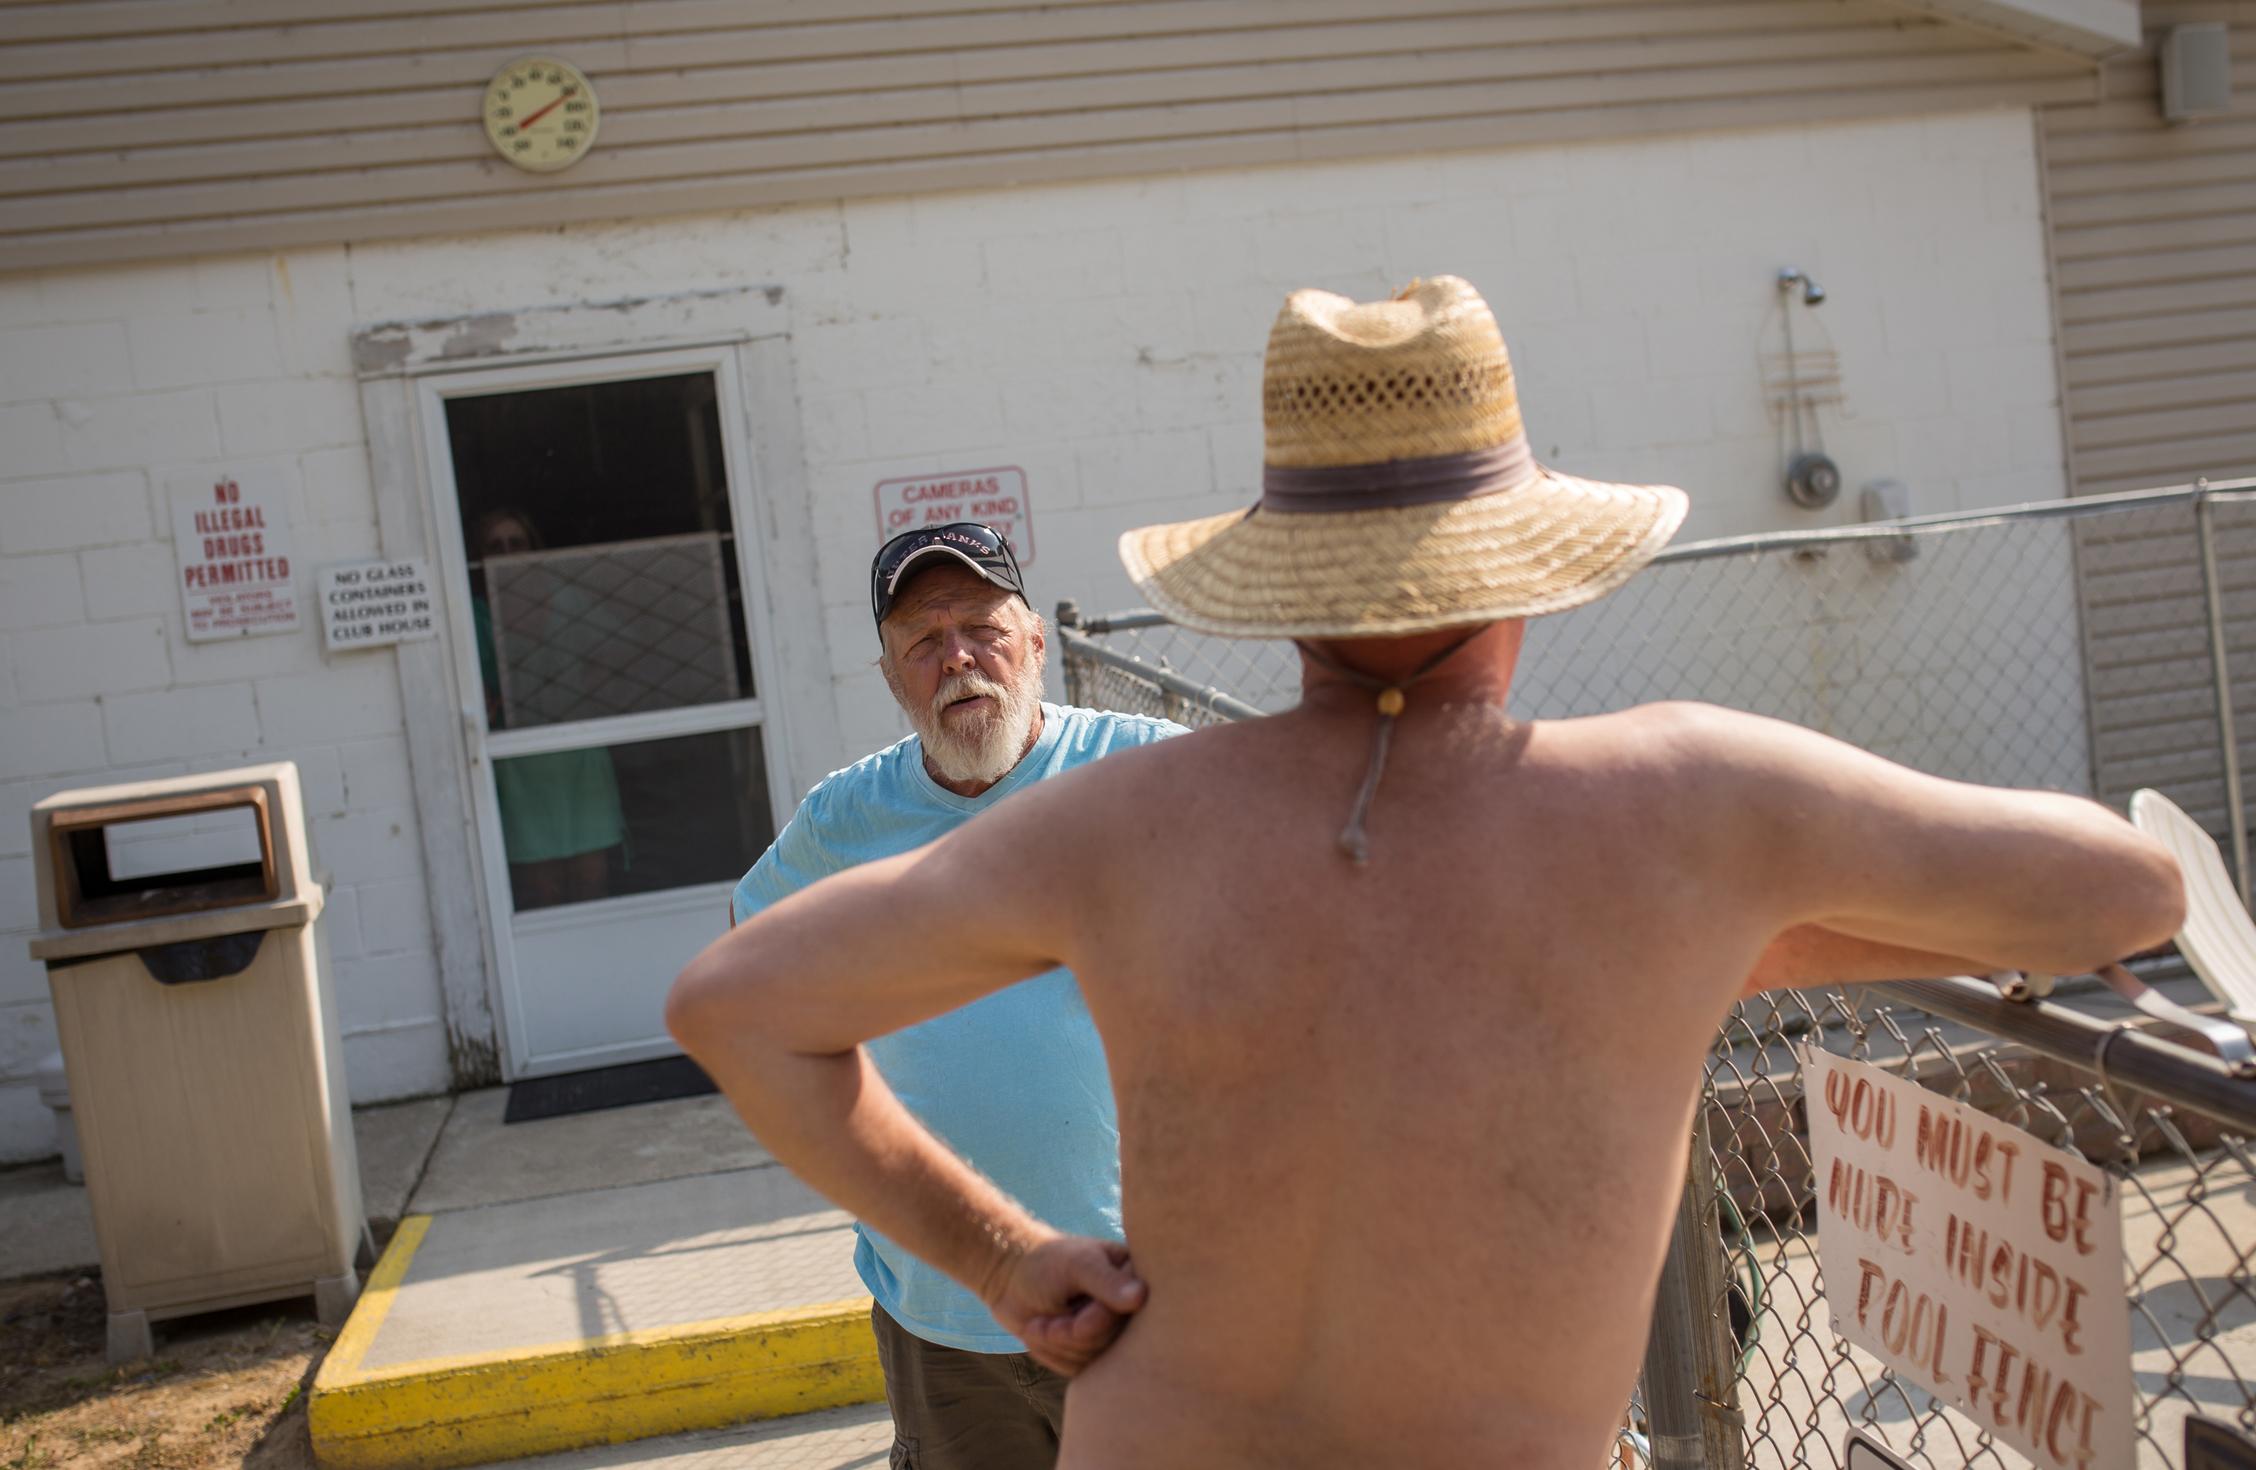 Nudity a way of life at campground in North Adams